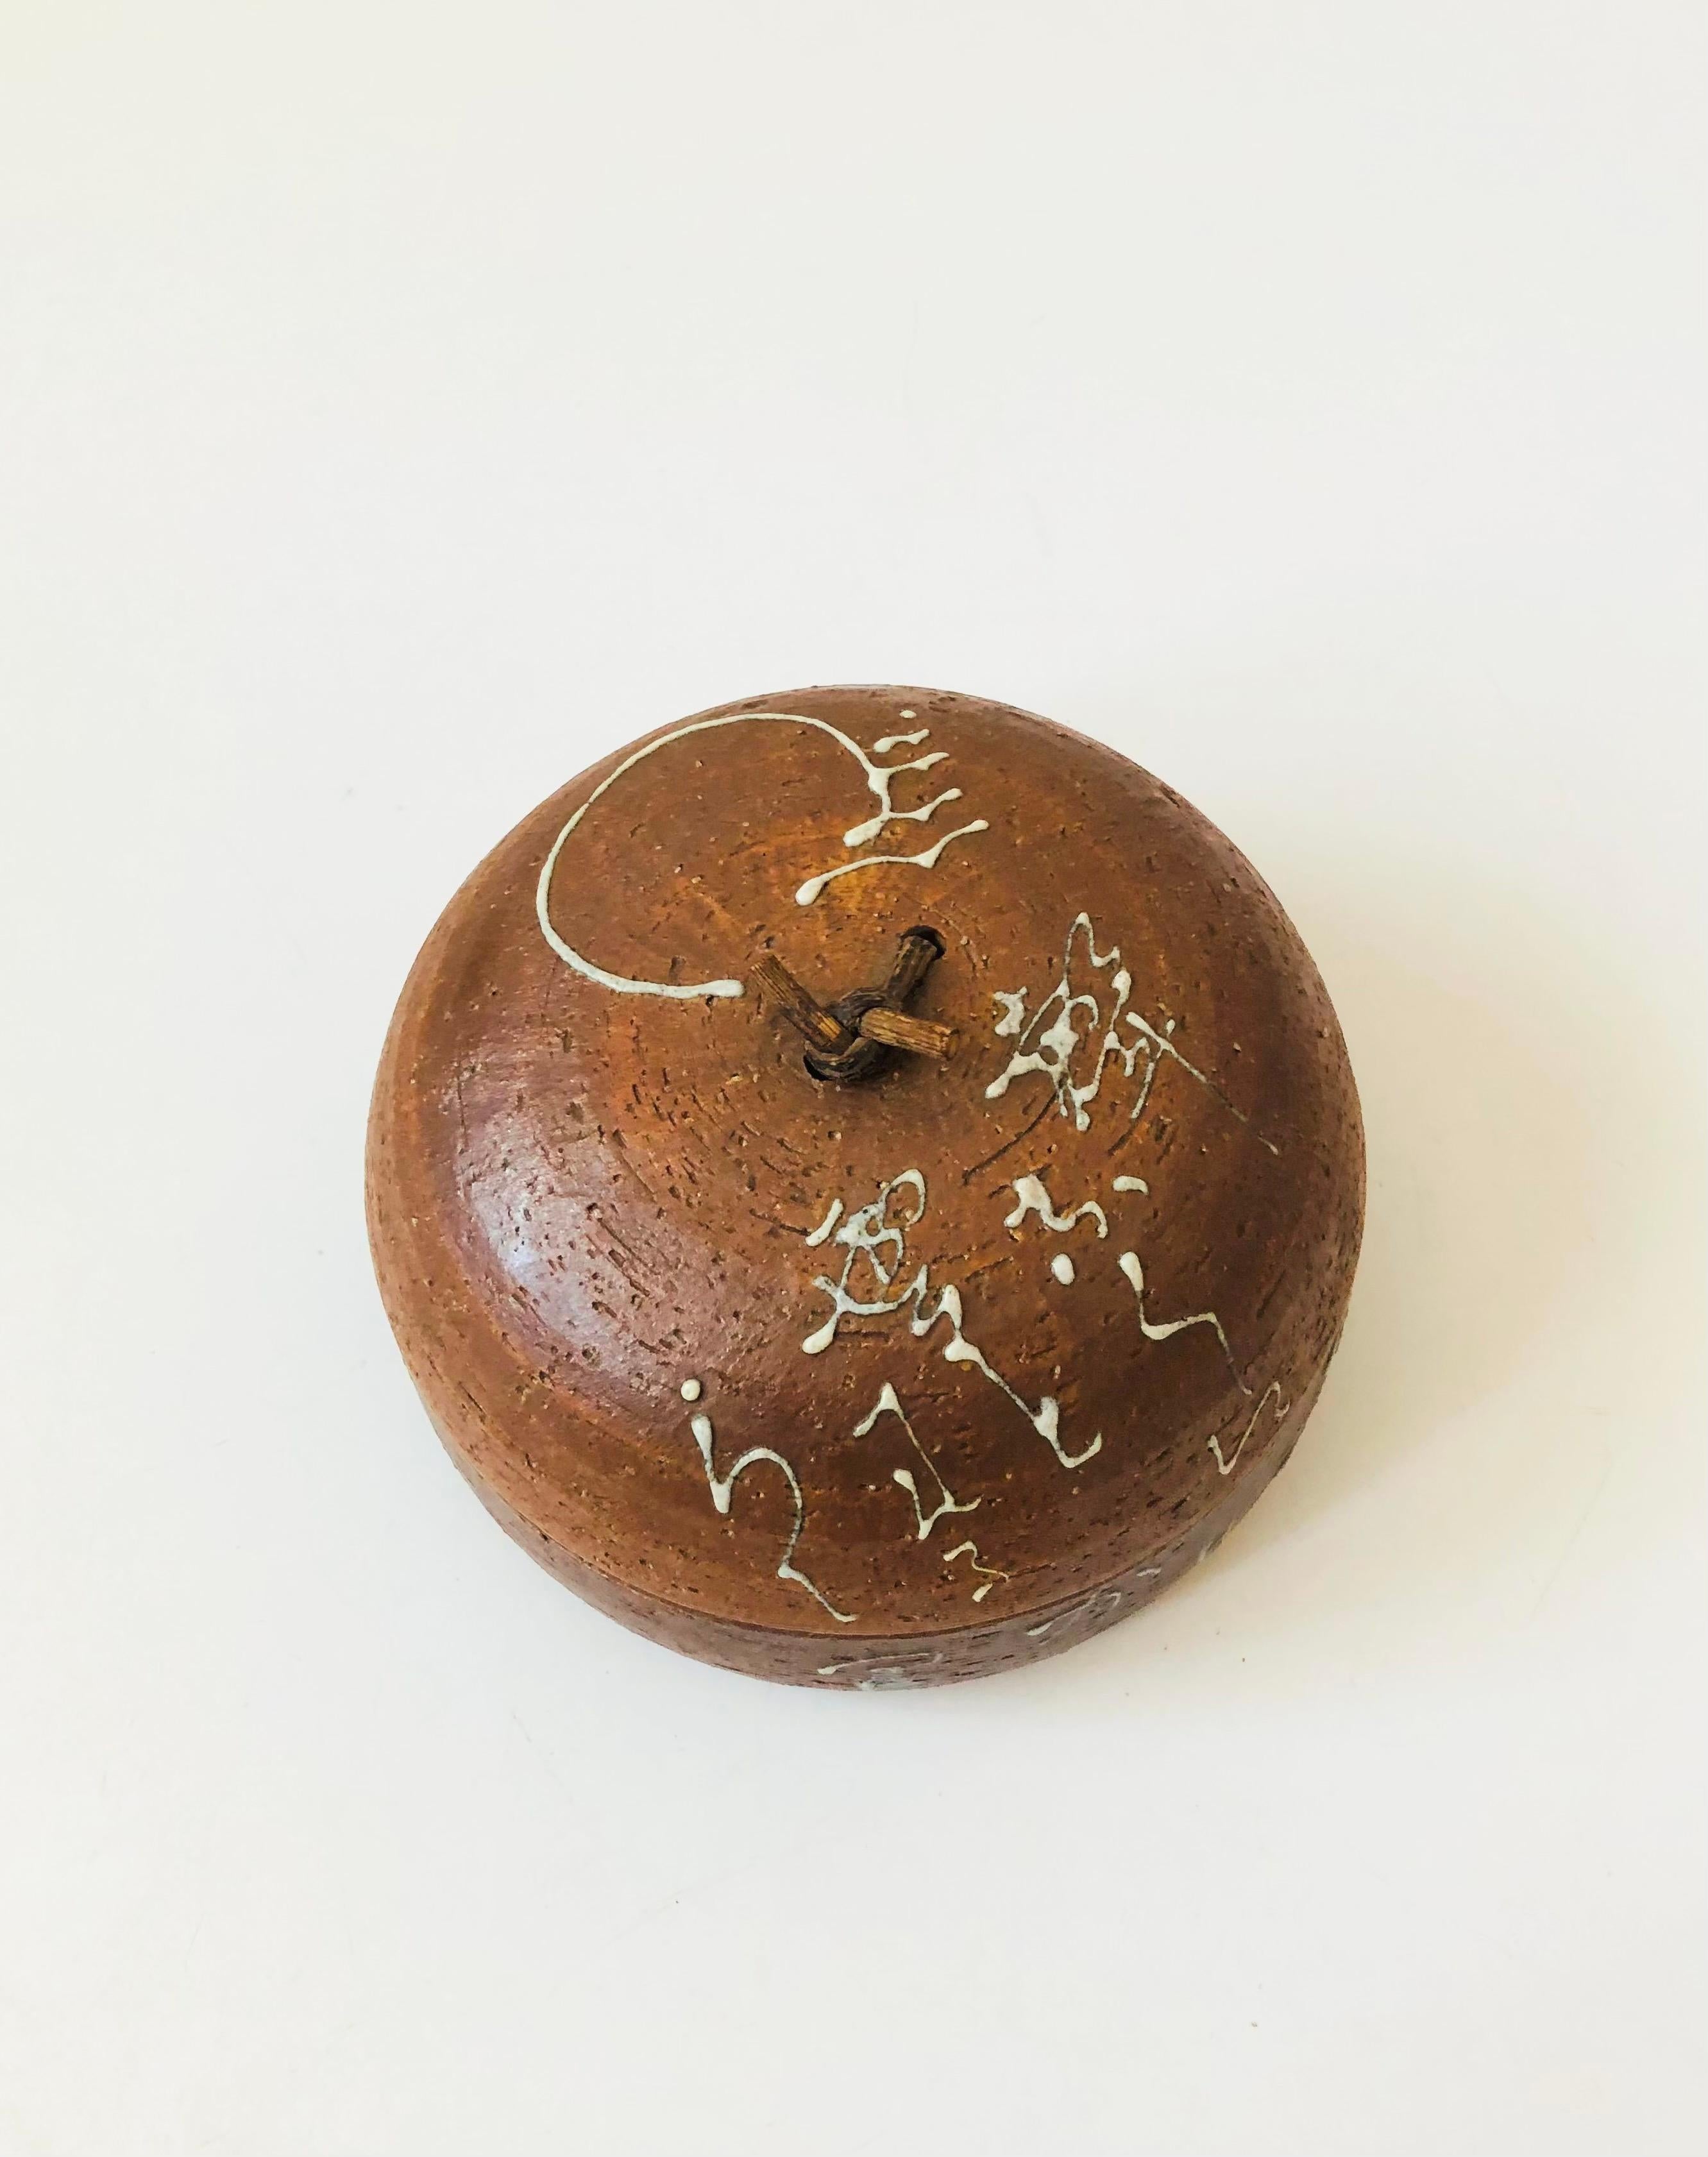 A beautiful vintage handmade pottery box. Natural clay color, decorated with a raised free form design in contrasting off-white glaze. Beautiful modern dome shape with a twisted twig as the handle. Glossy glaze to the interior. A truly special